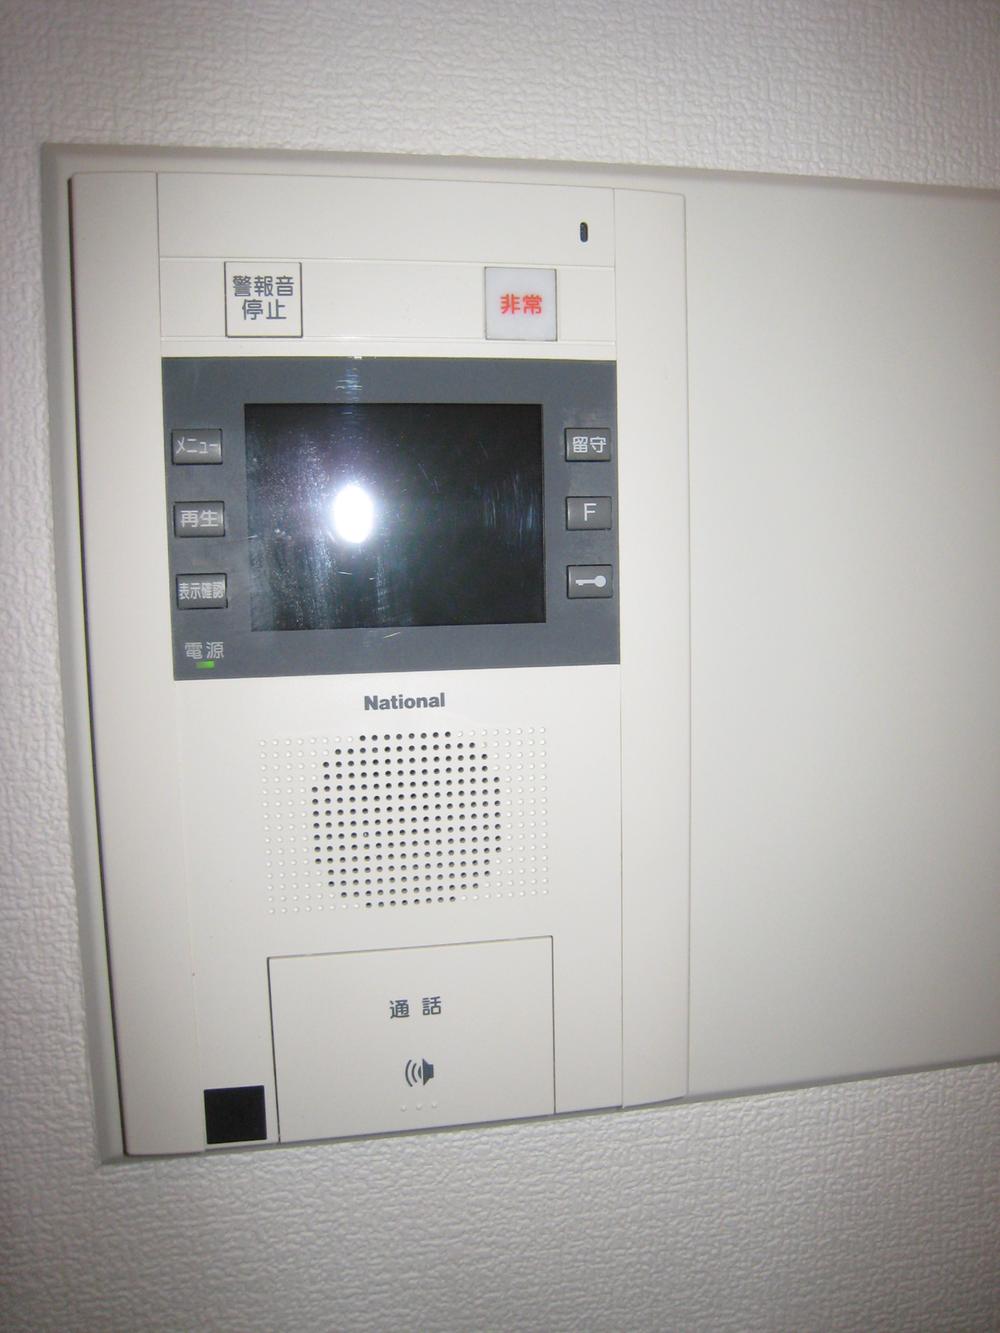 Security equipment. It is safe and can see the visitor on the screen.